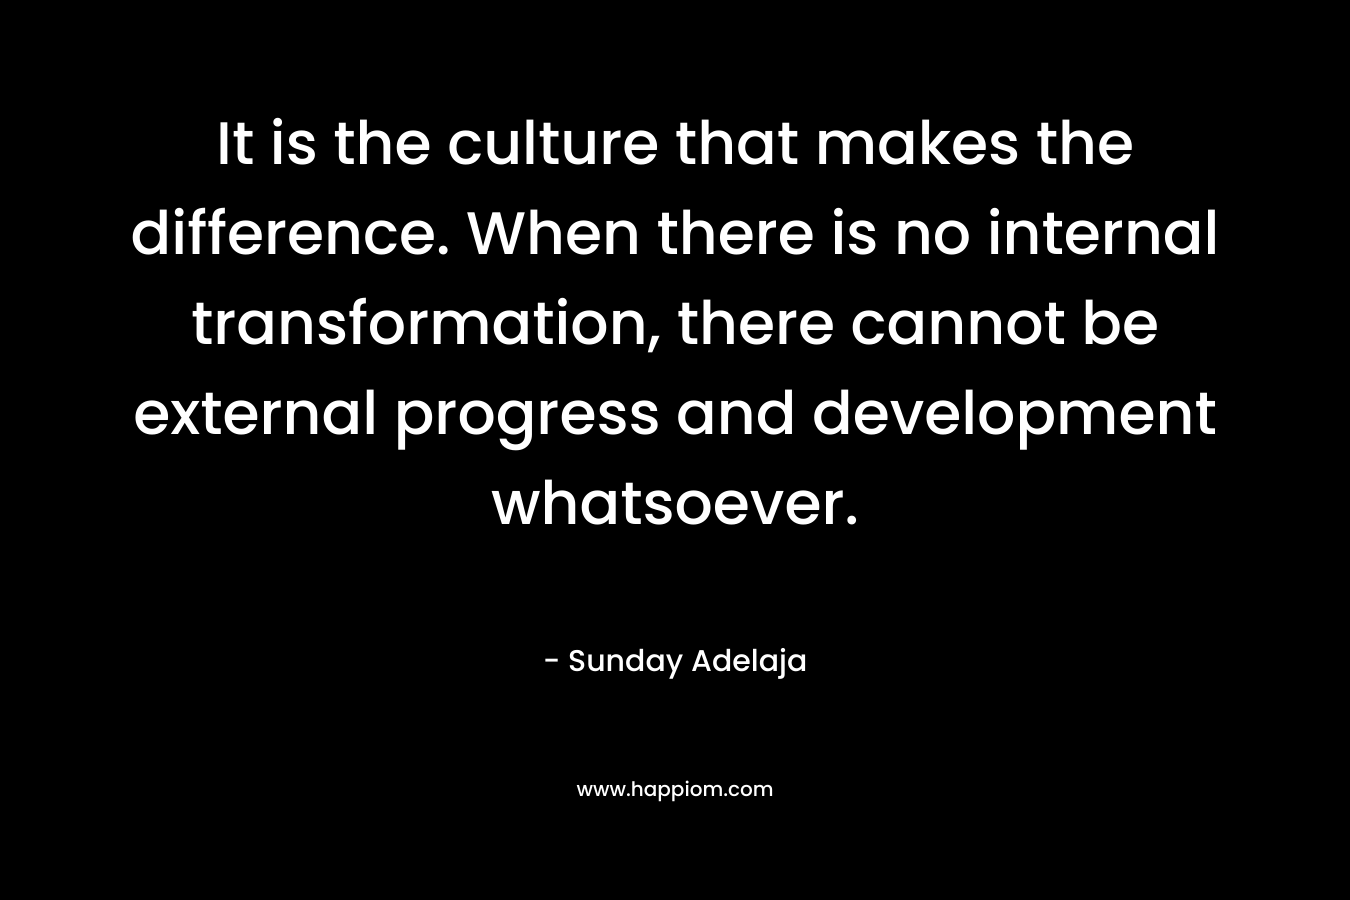 It is the culture that makes the difference. When there is no internal transformation, there cannot be external progress and development whatsoever.